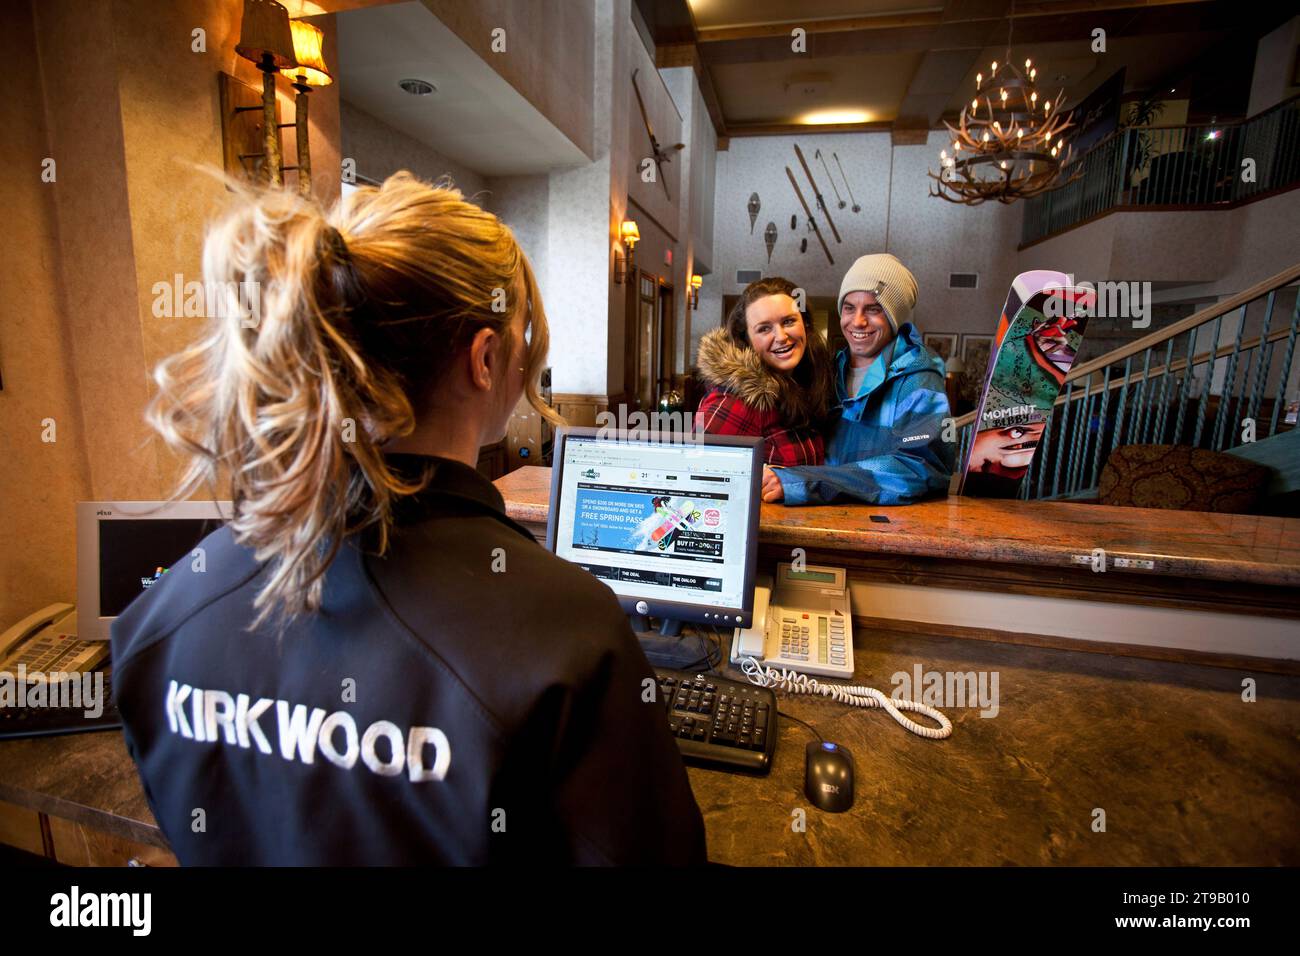 Young couple checking in to a ski lodge / hotel. Stock Photo